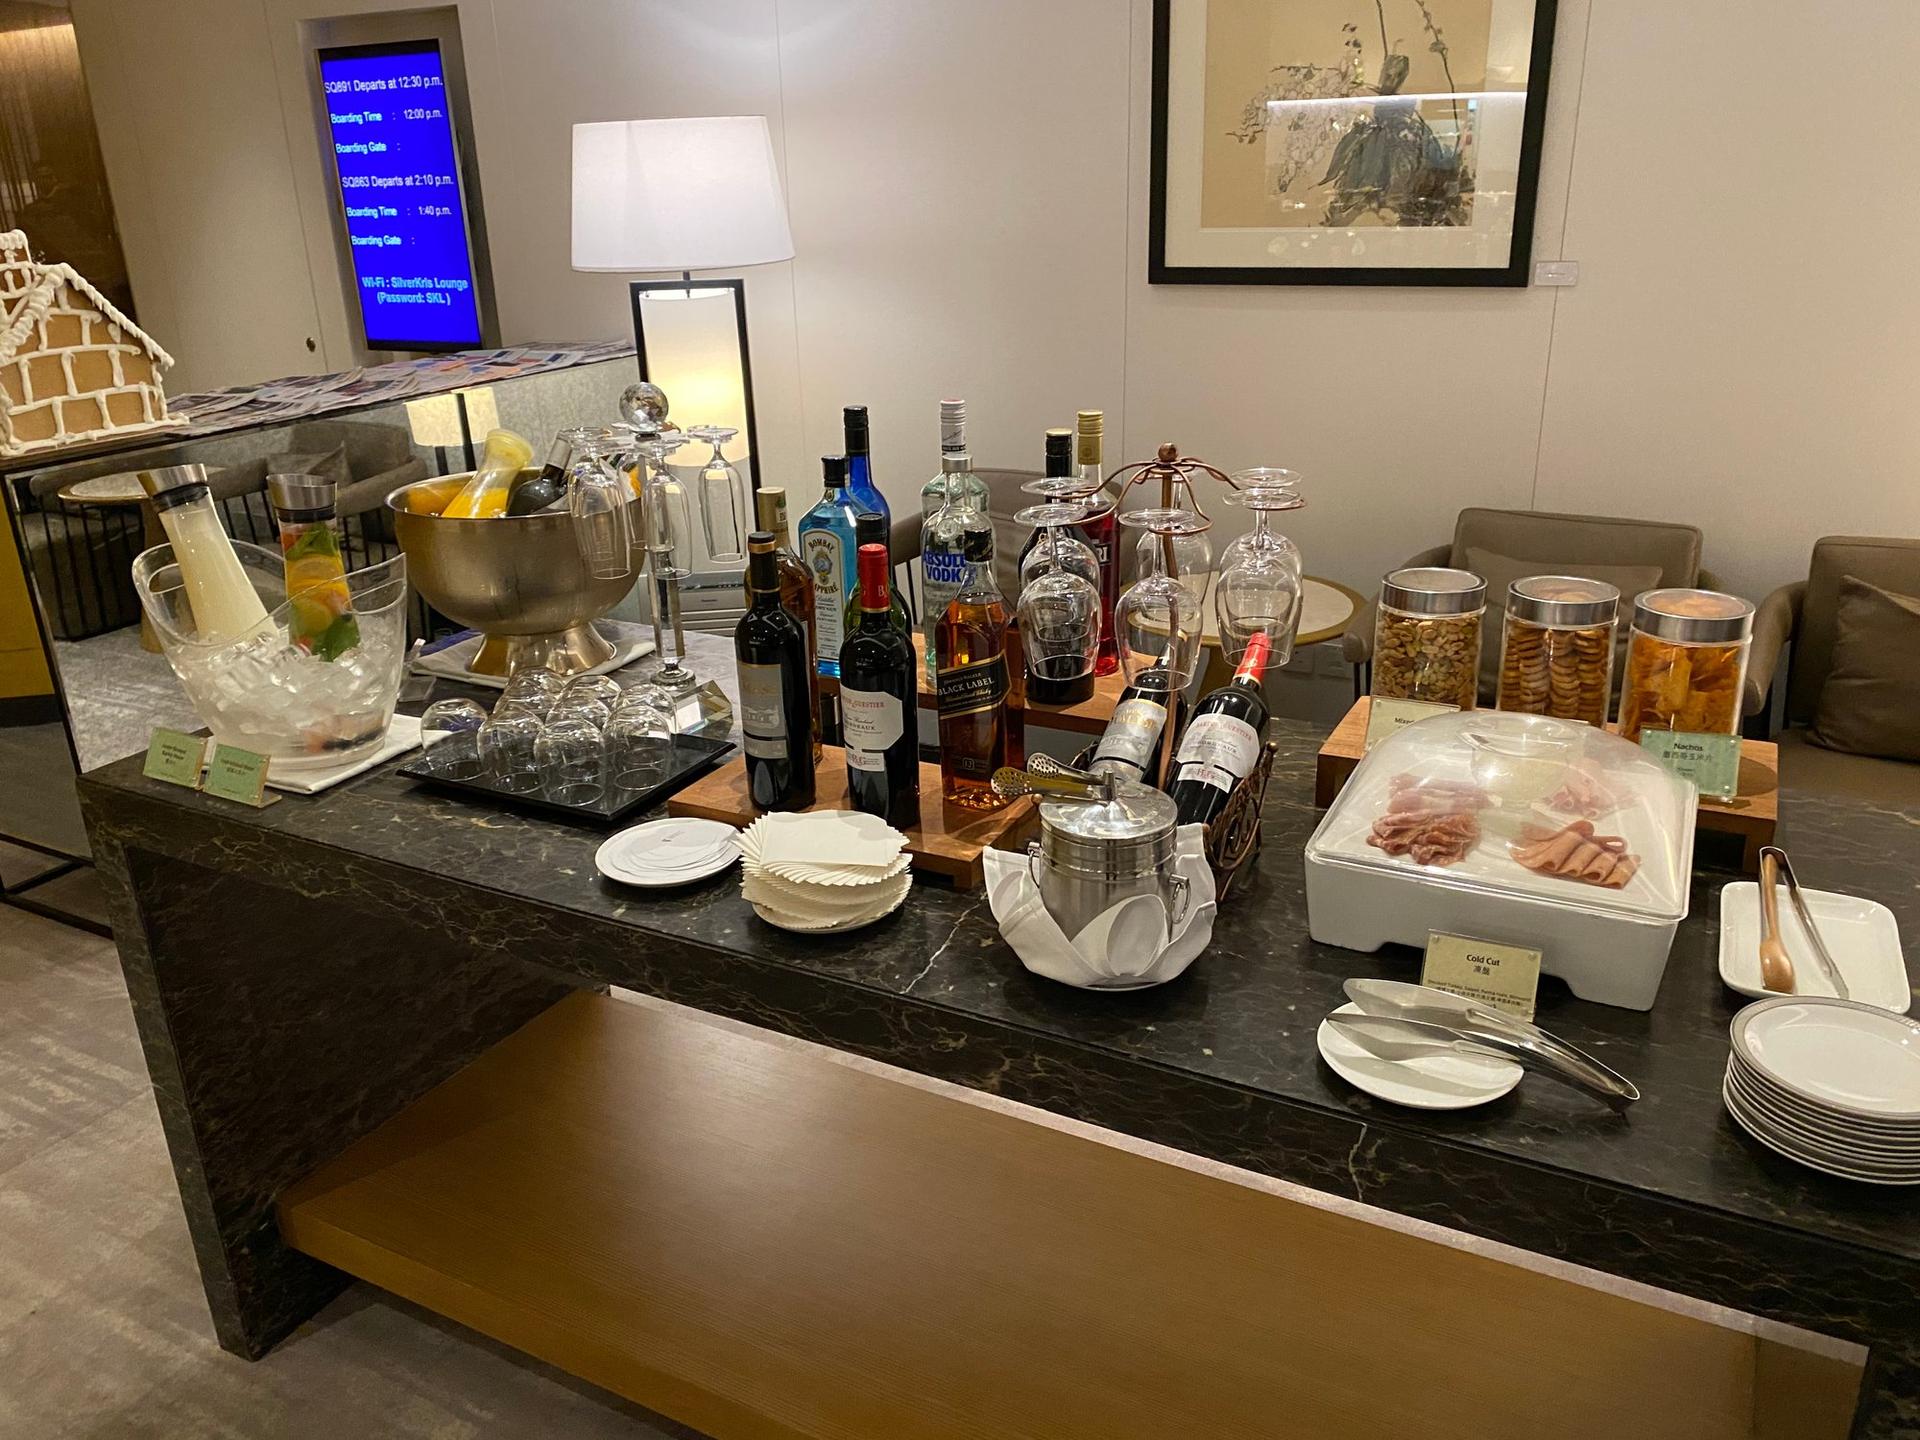 Singapore Airlines SilverKris Business Class Lounge image 35 of 68